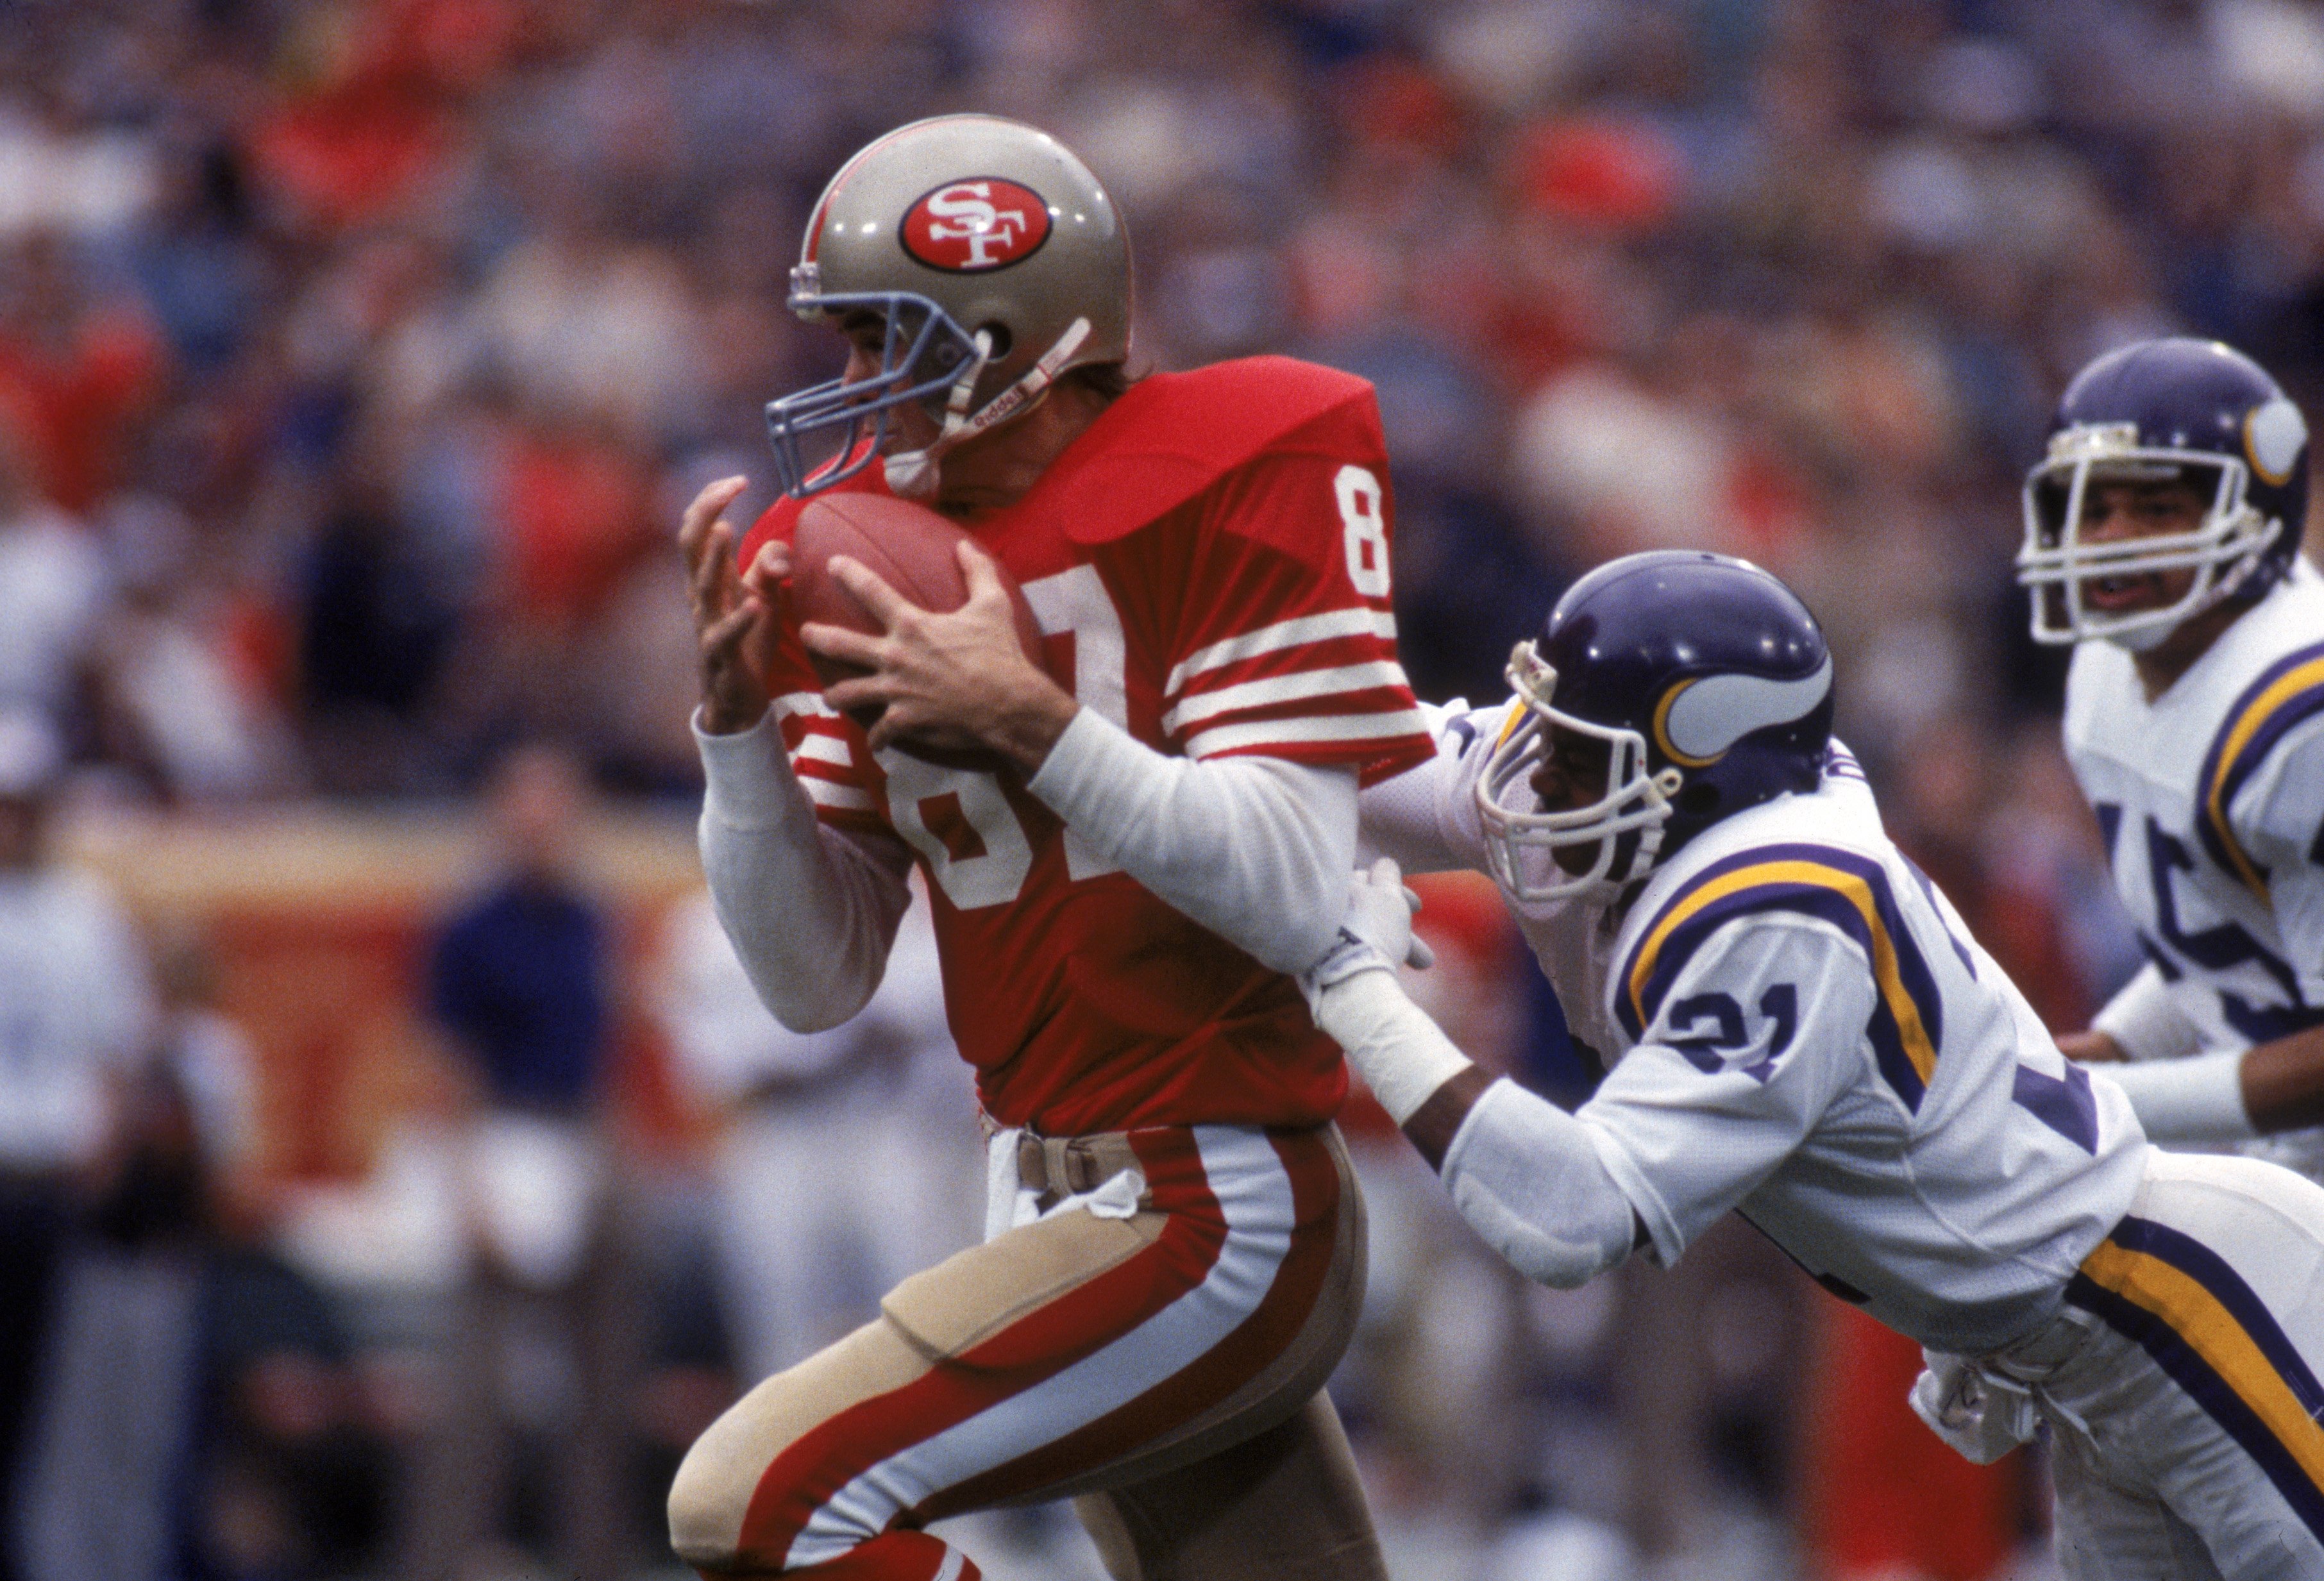 SAN FRANCISCO - DECEMBER 8:  Wide receiver Dwight Clark #87 of the San Francisco 49ers catches a pass against defensive back Rufus Bess #21 of the Minnesota Vikings during a game at Candlestick Park on December 8, 1984 in San Francisco, California.  The 4